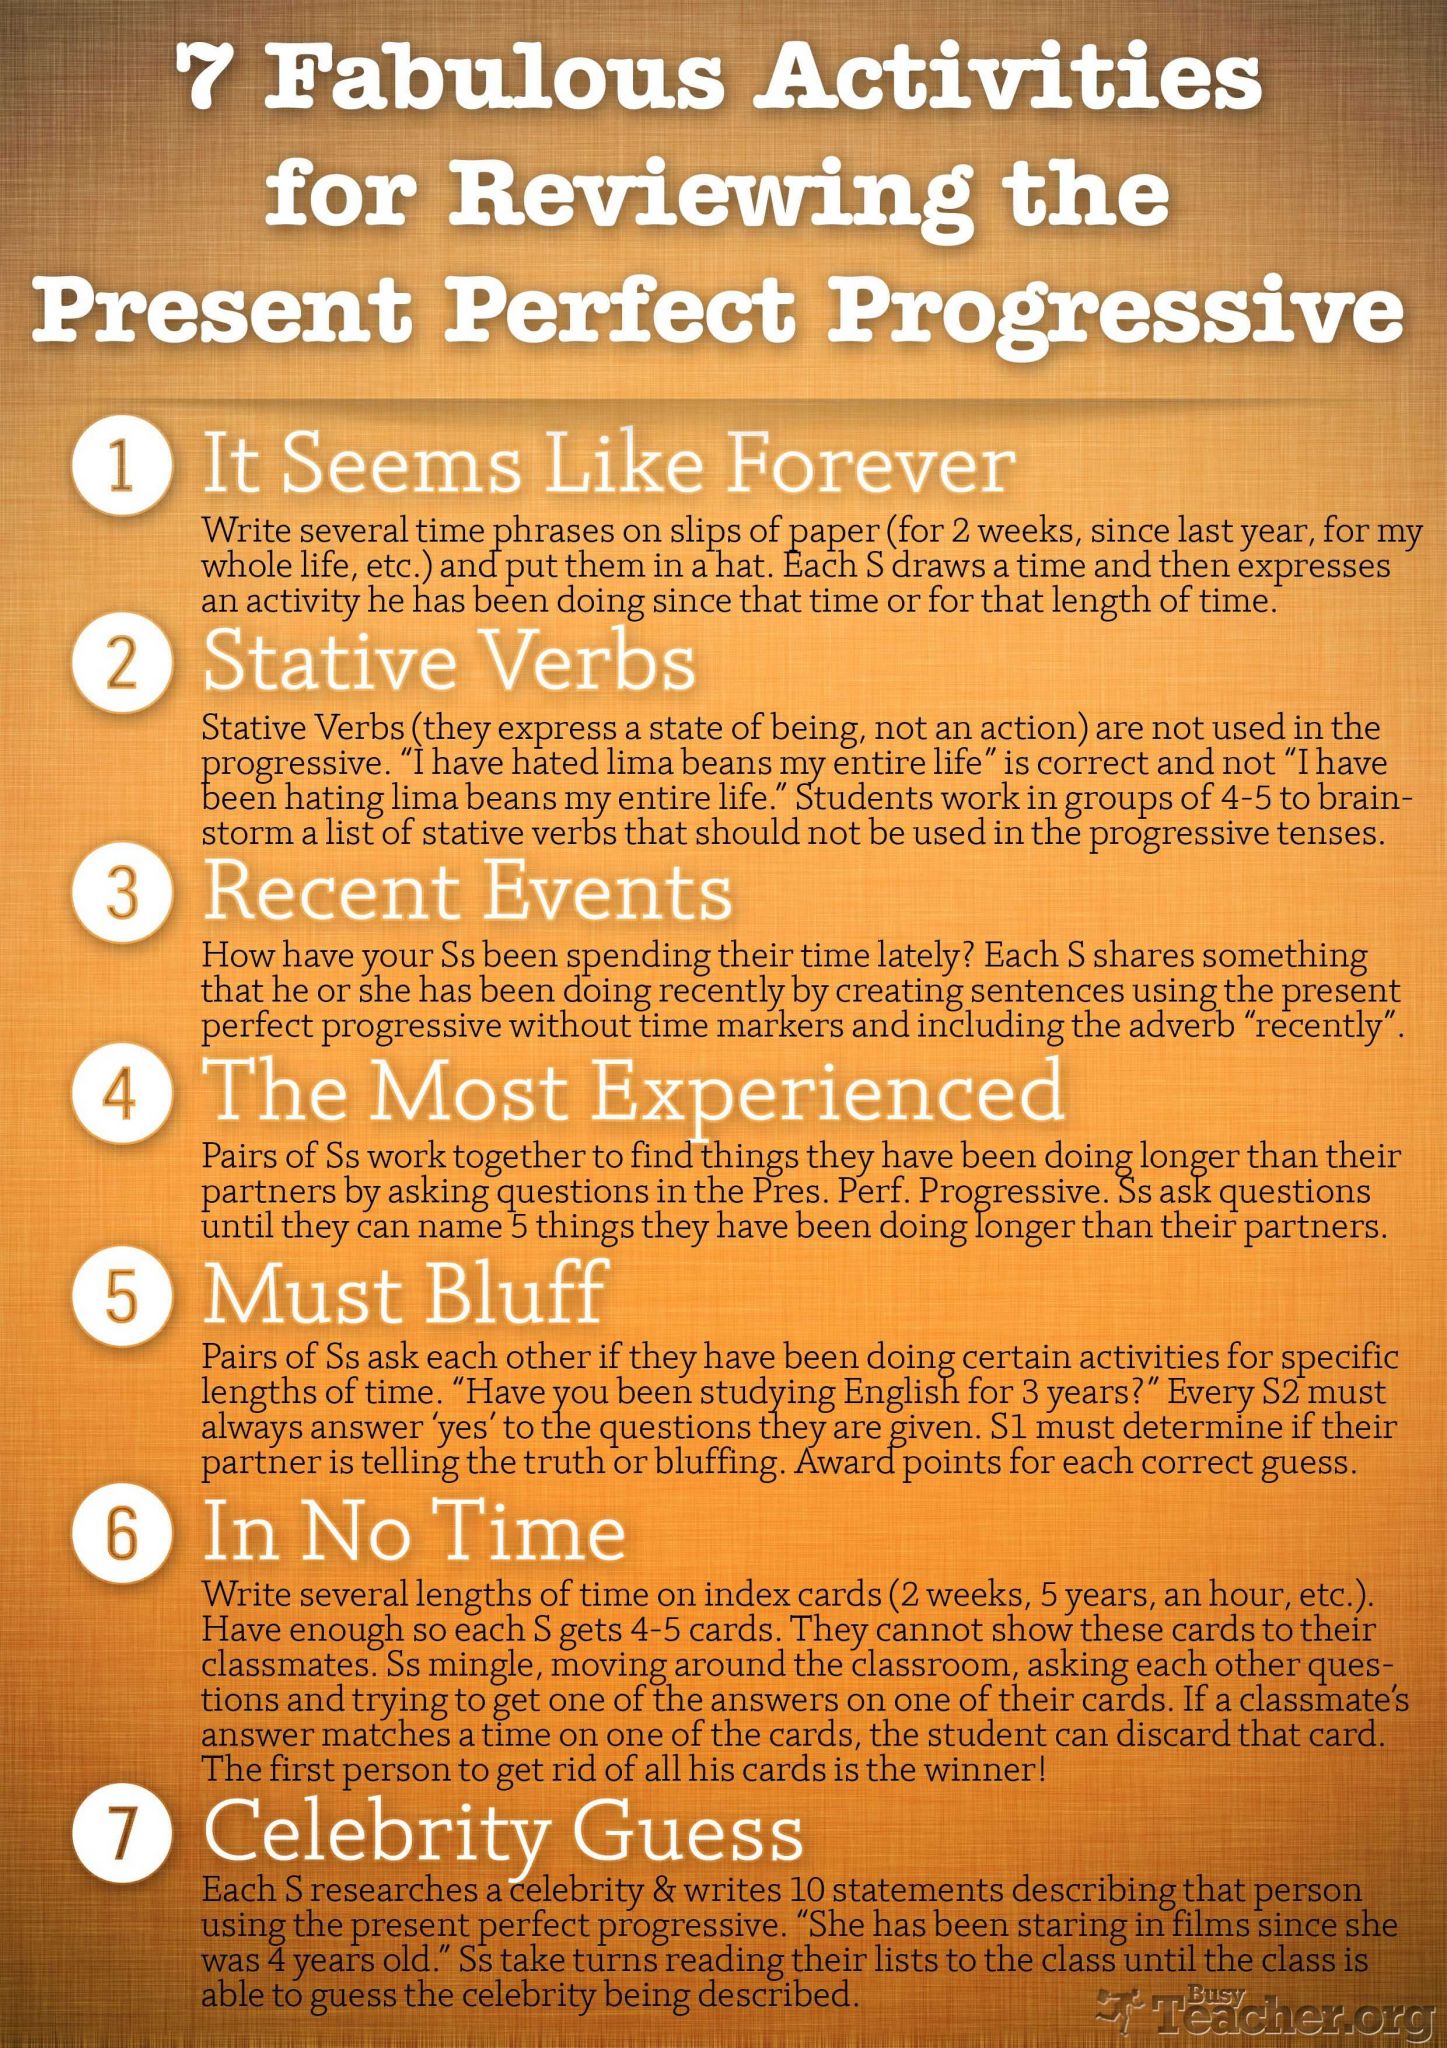 Progressive Movement Worksheet Answers as Well as Poster 7 Fabulous Activities to Teach or Review the Present Perfect